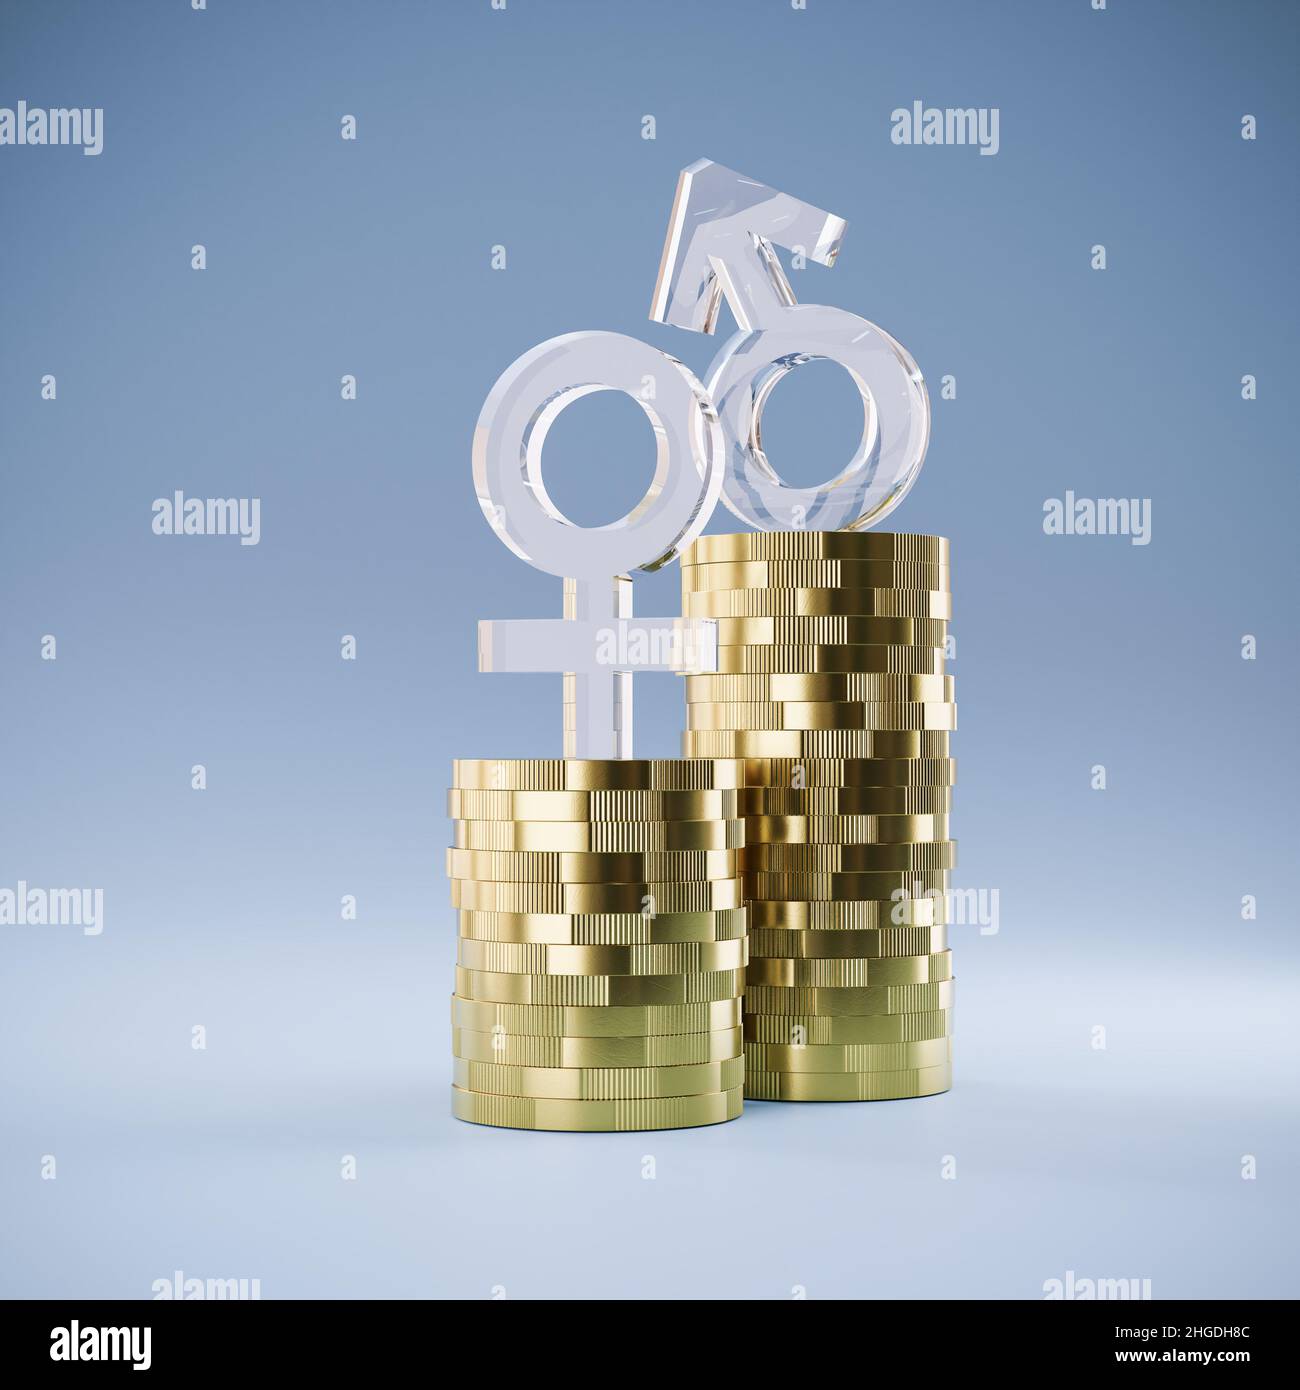 Gender pay gap concept: Two heaps of coins with different height and male and female symbols made from glass on top. Stock Photo